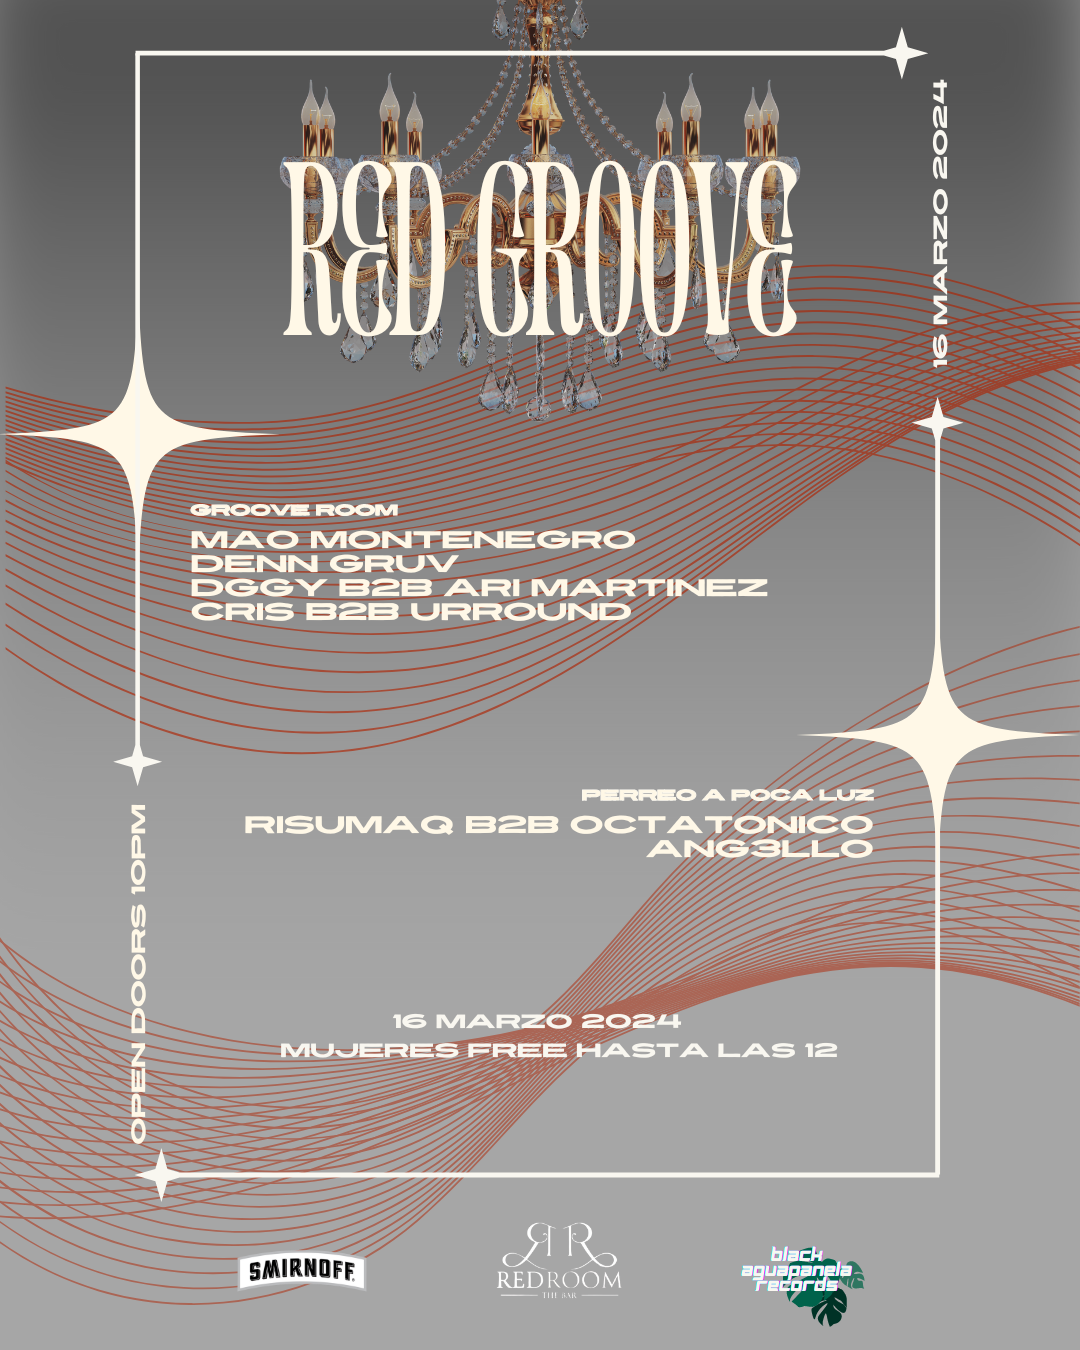 Red Groove - フライヤー表